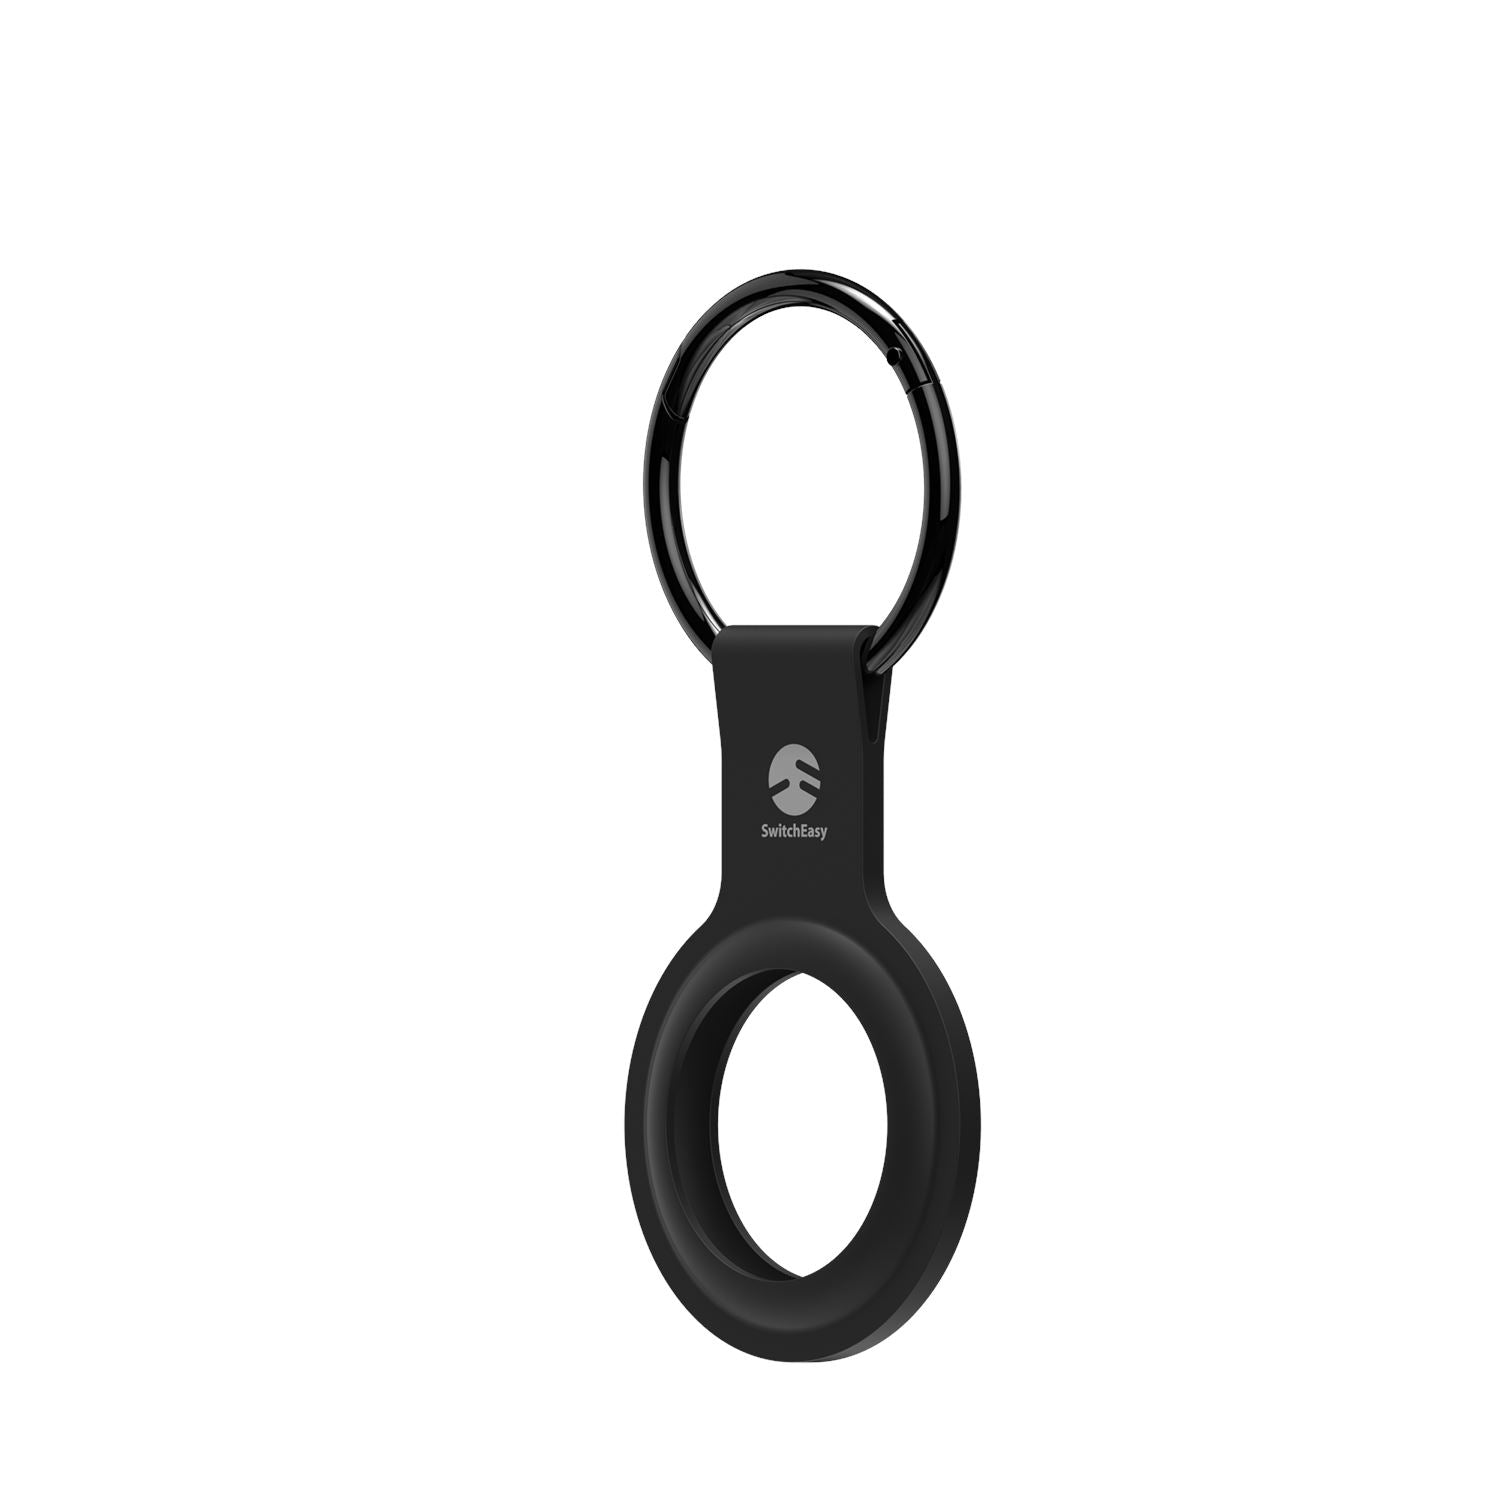 Switcheasy Skin Silicone Keyring For AirTag, Black Default Switcheasy 